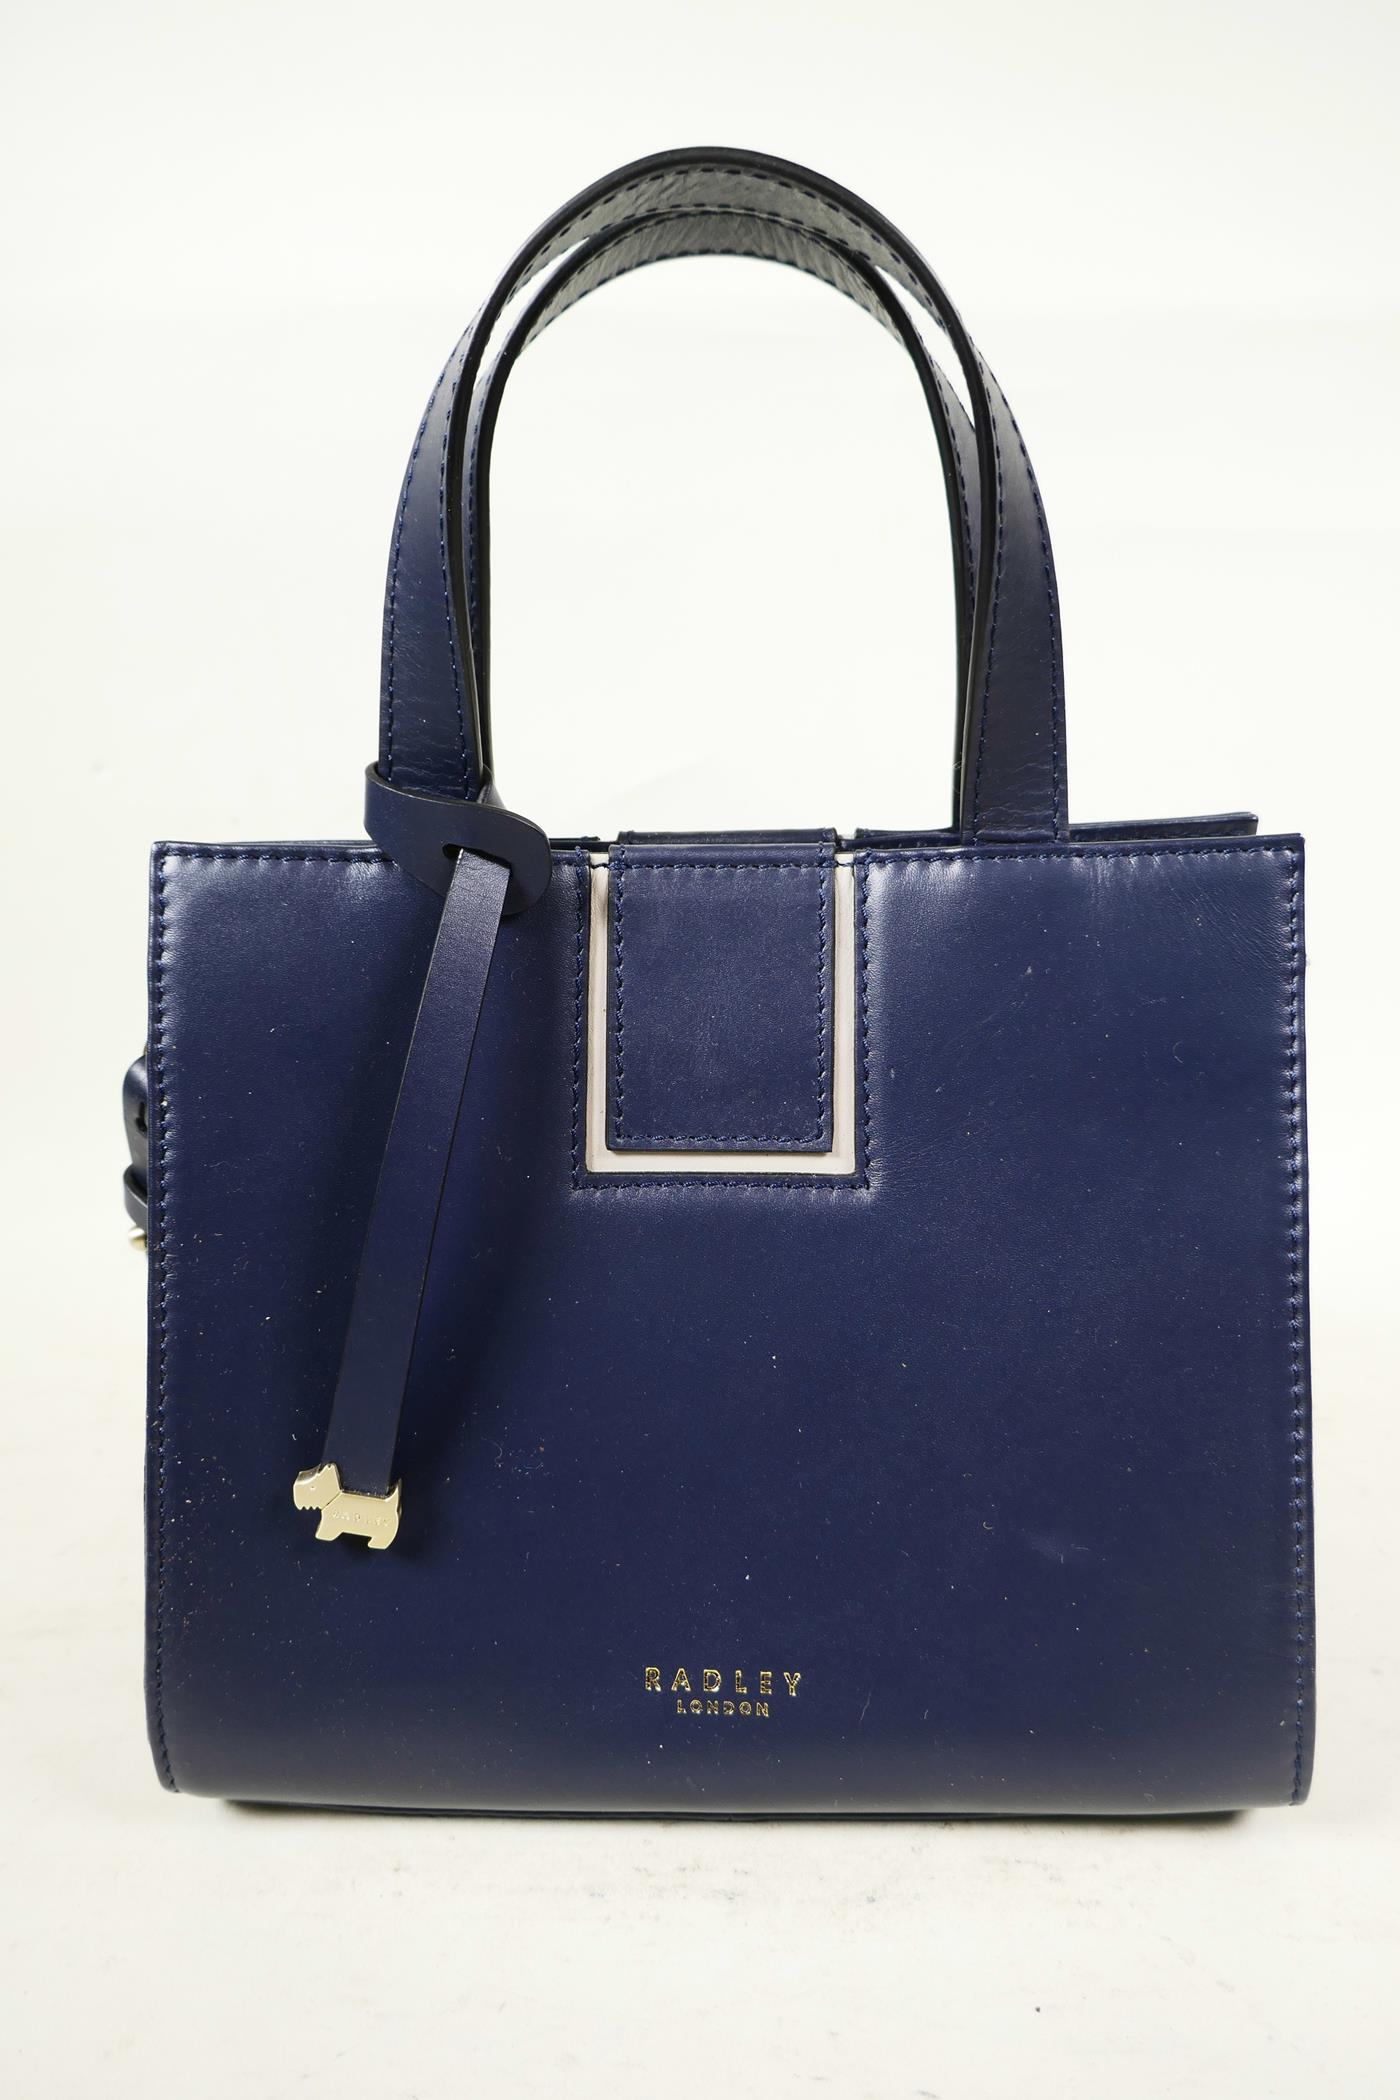 Four contemporary leather and faux leather handbags, including a new navy leather Radley small - Image 2 of 9